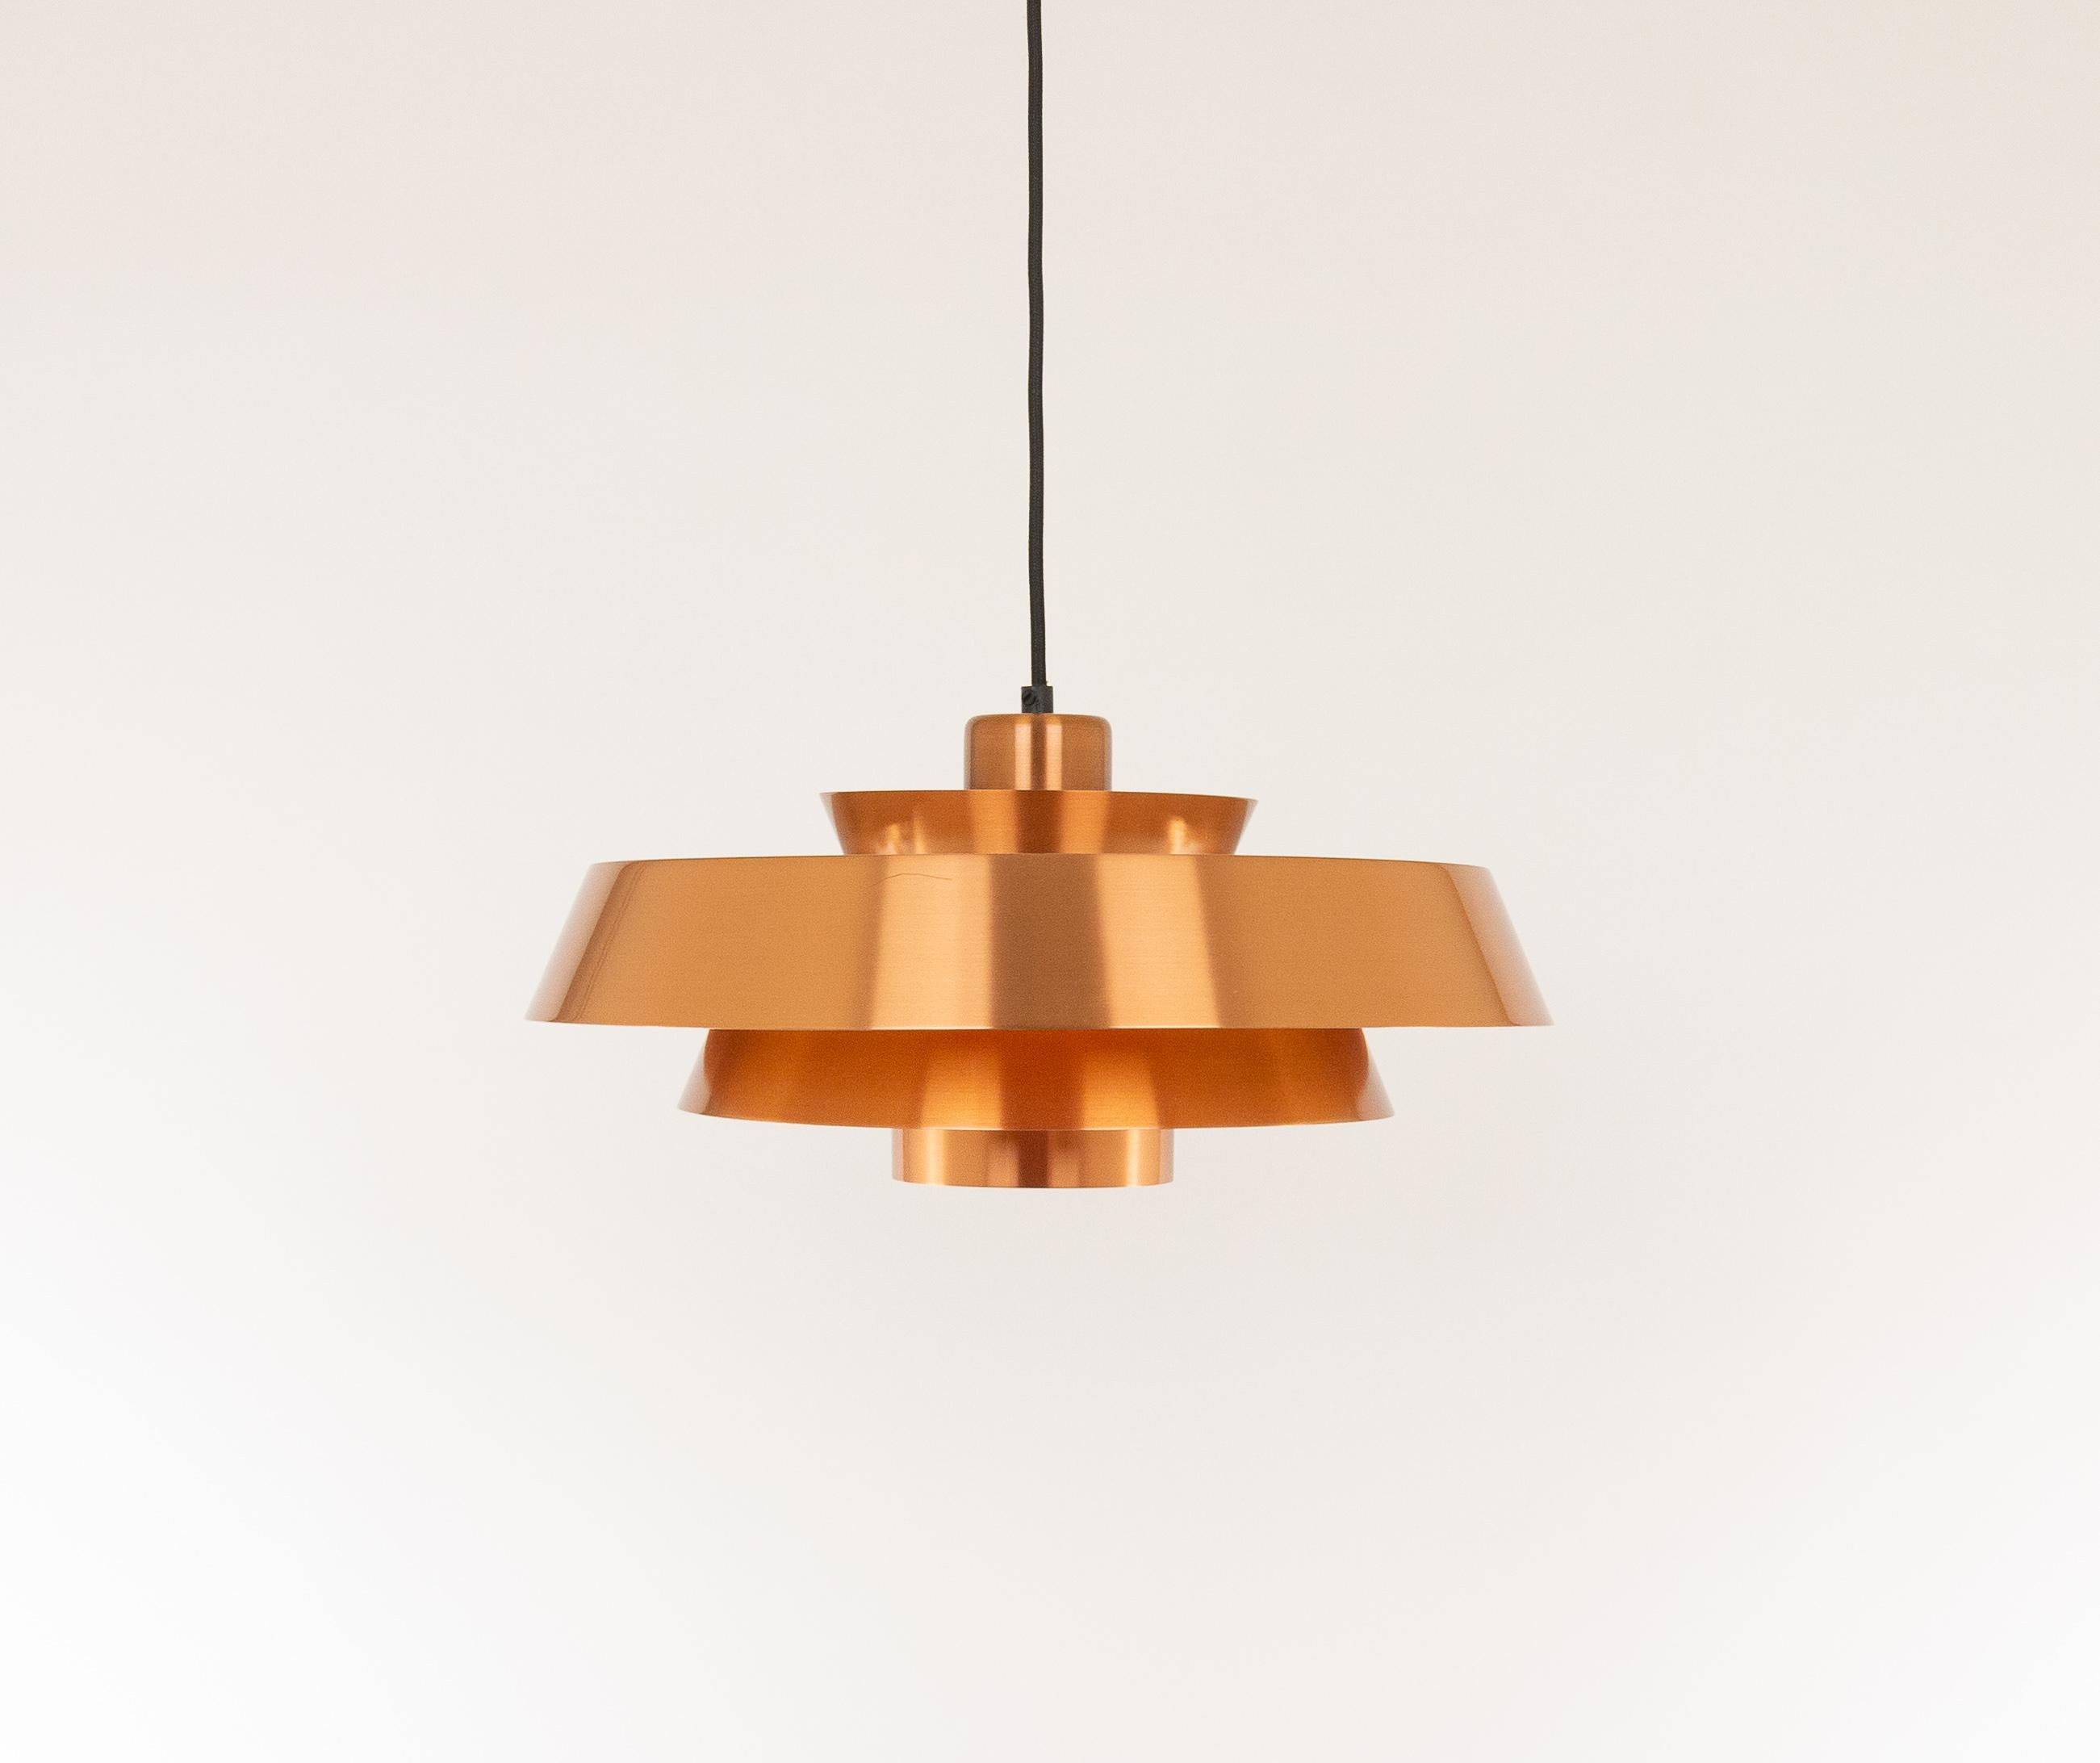 Copper Nova pendant designed in the 1960s by Jo Hammerborg, main designer of Danish lighting manufacturer Fog & Mørup in the 1960s and 1970s.

Nova was produced in three different types of metal - copper, brass and aluminium. The lamp is lacquered